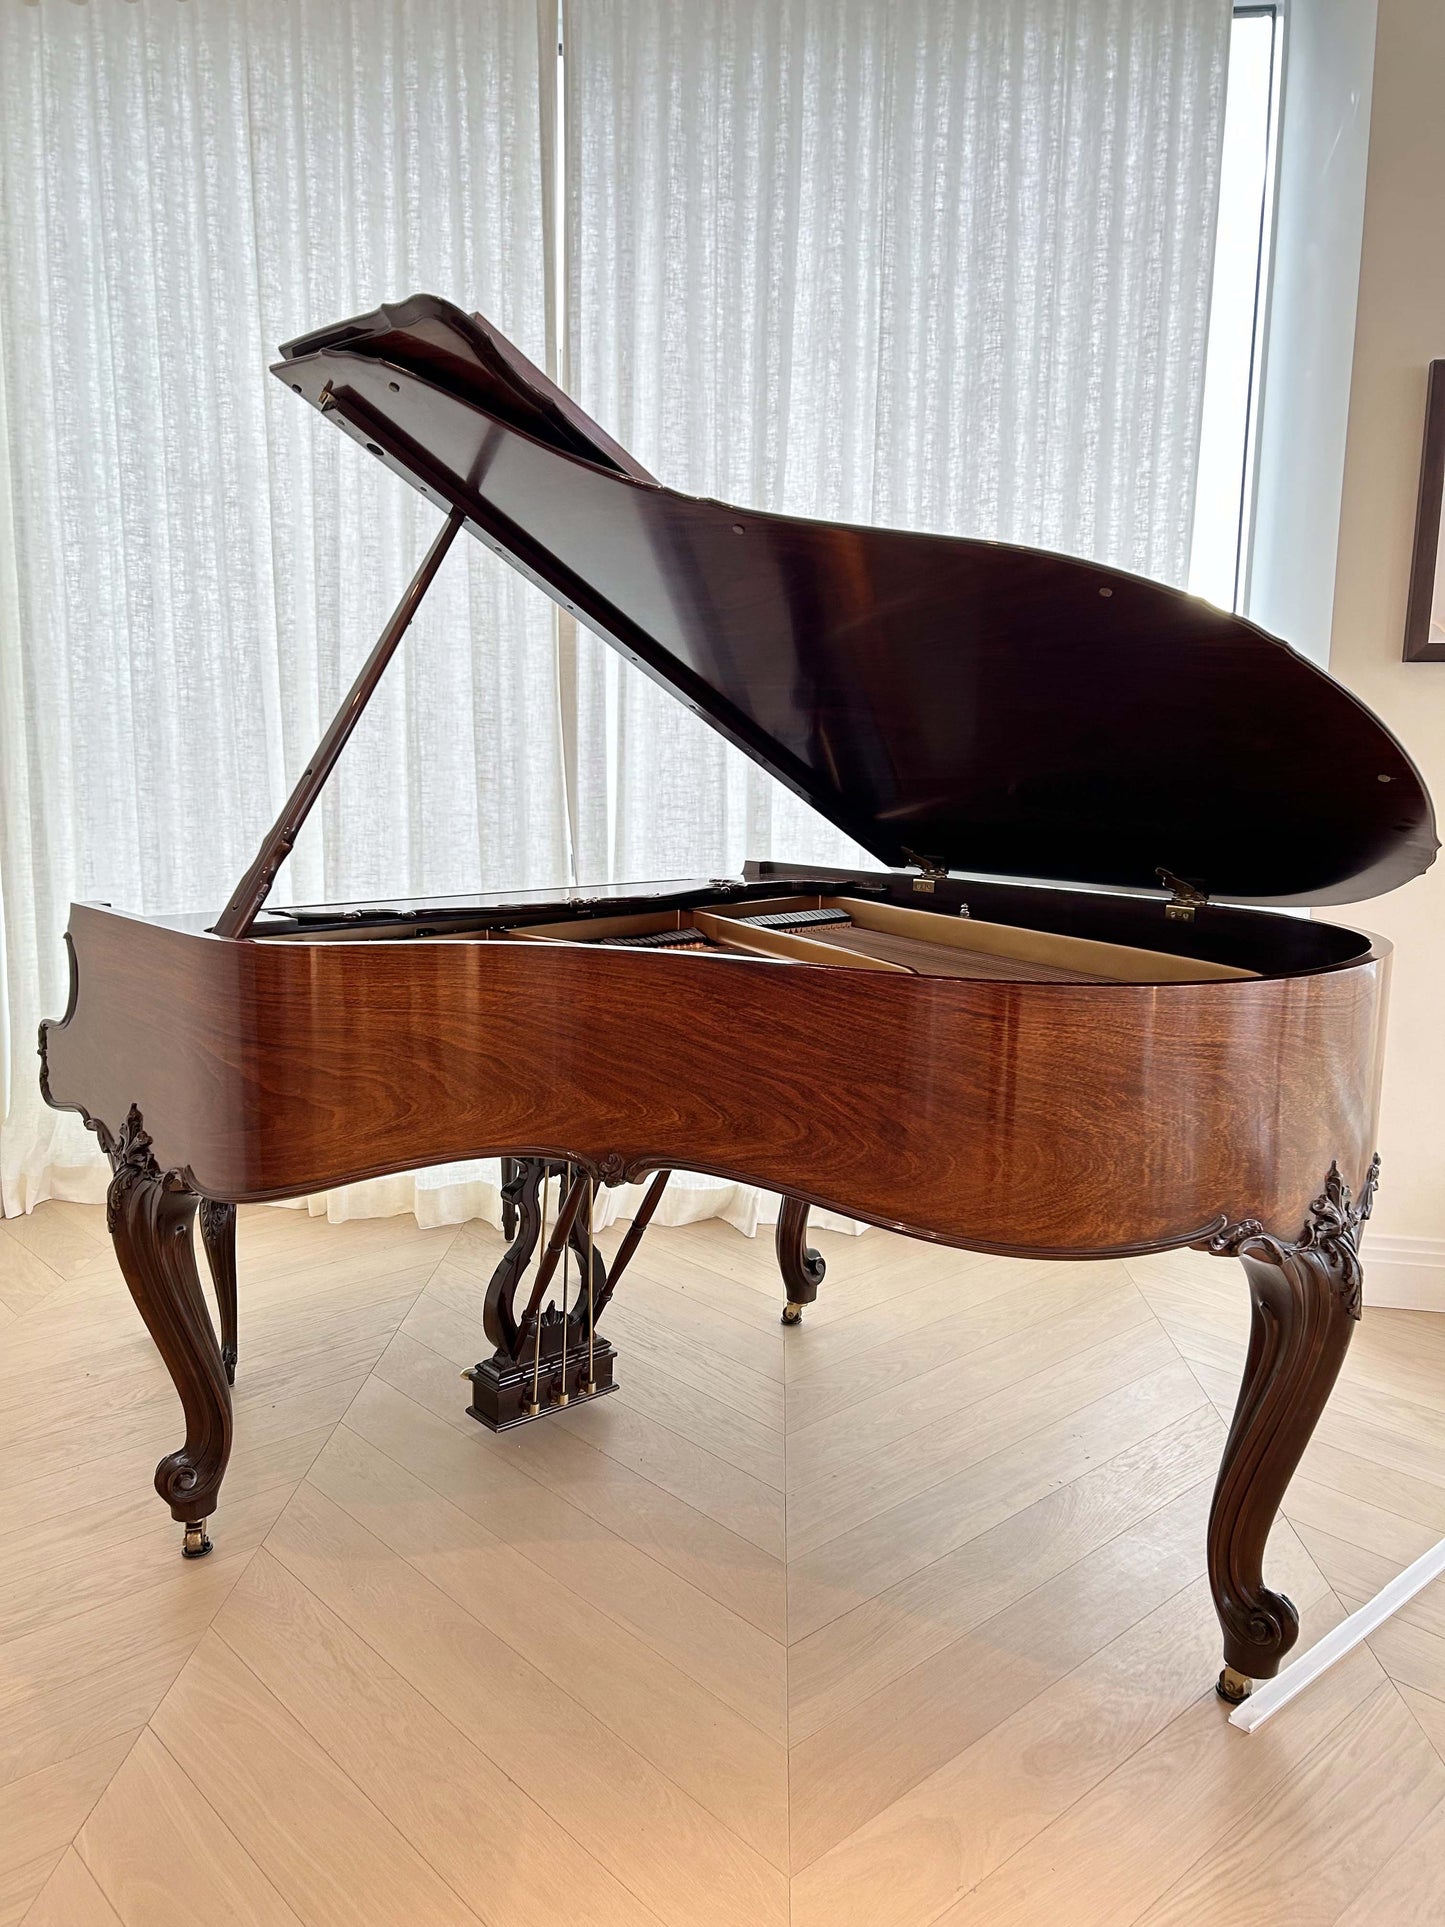 1997 Steinway Model M Louis XV Piano | Sketch 501A | East Indian Rosewood | Crown Jewel Collection